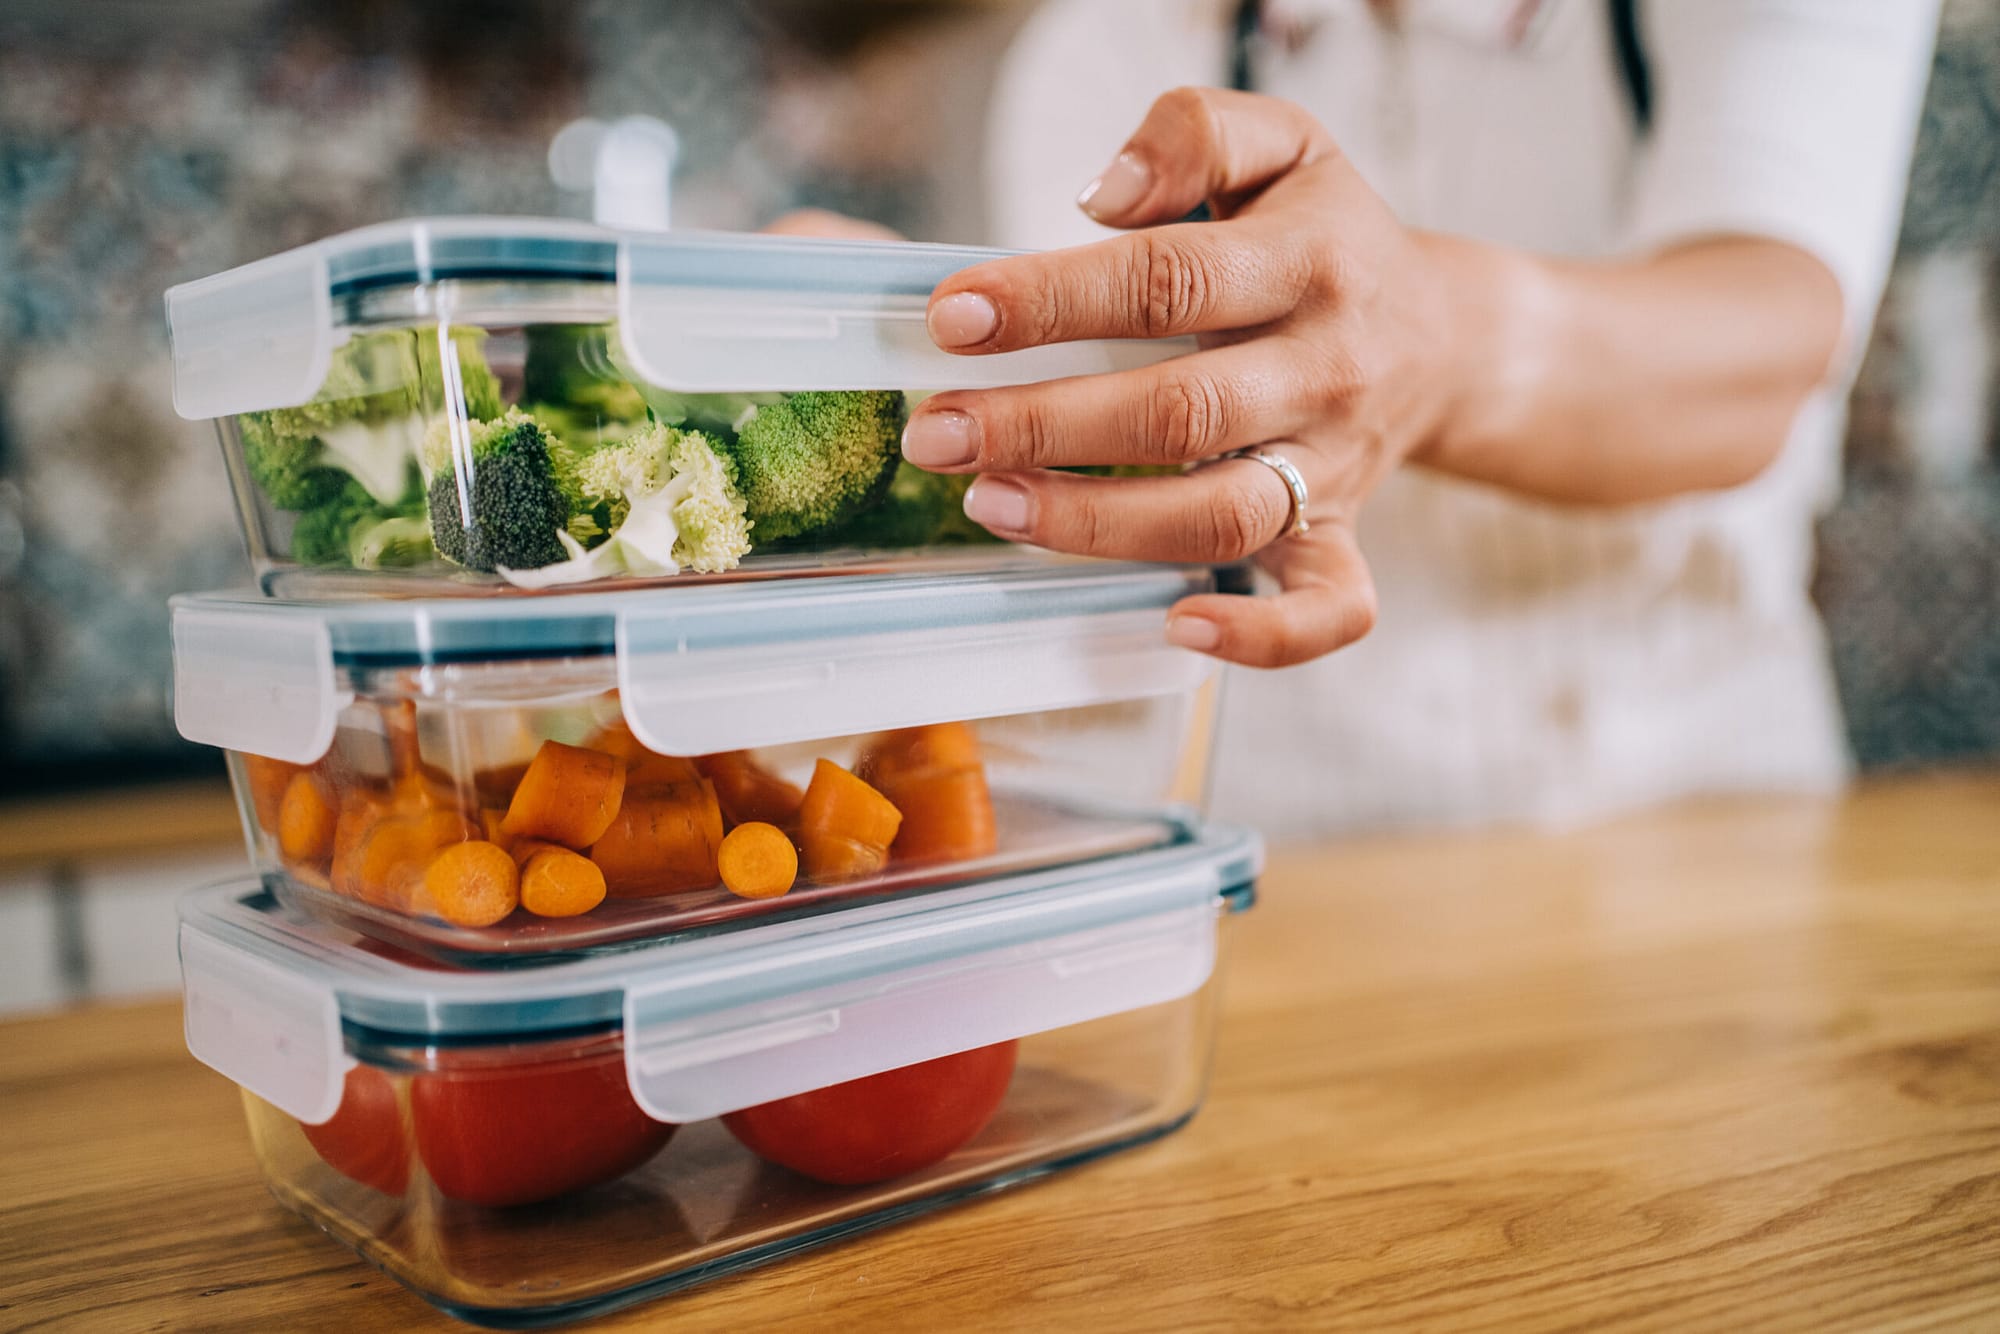 Setting aside time to meal prep is a great way to ensure you have healthy meals throughout your busy week.